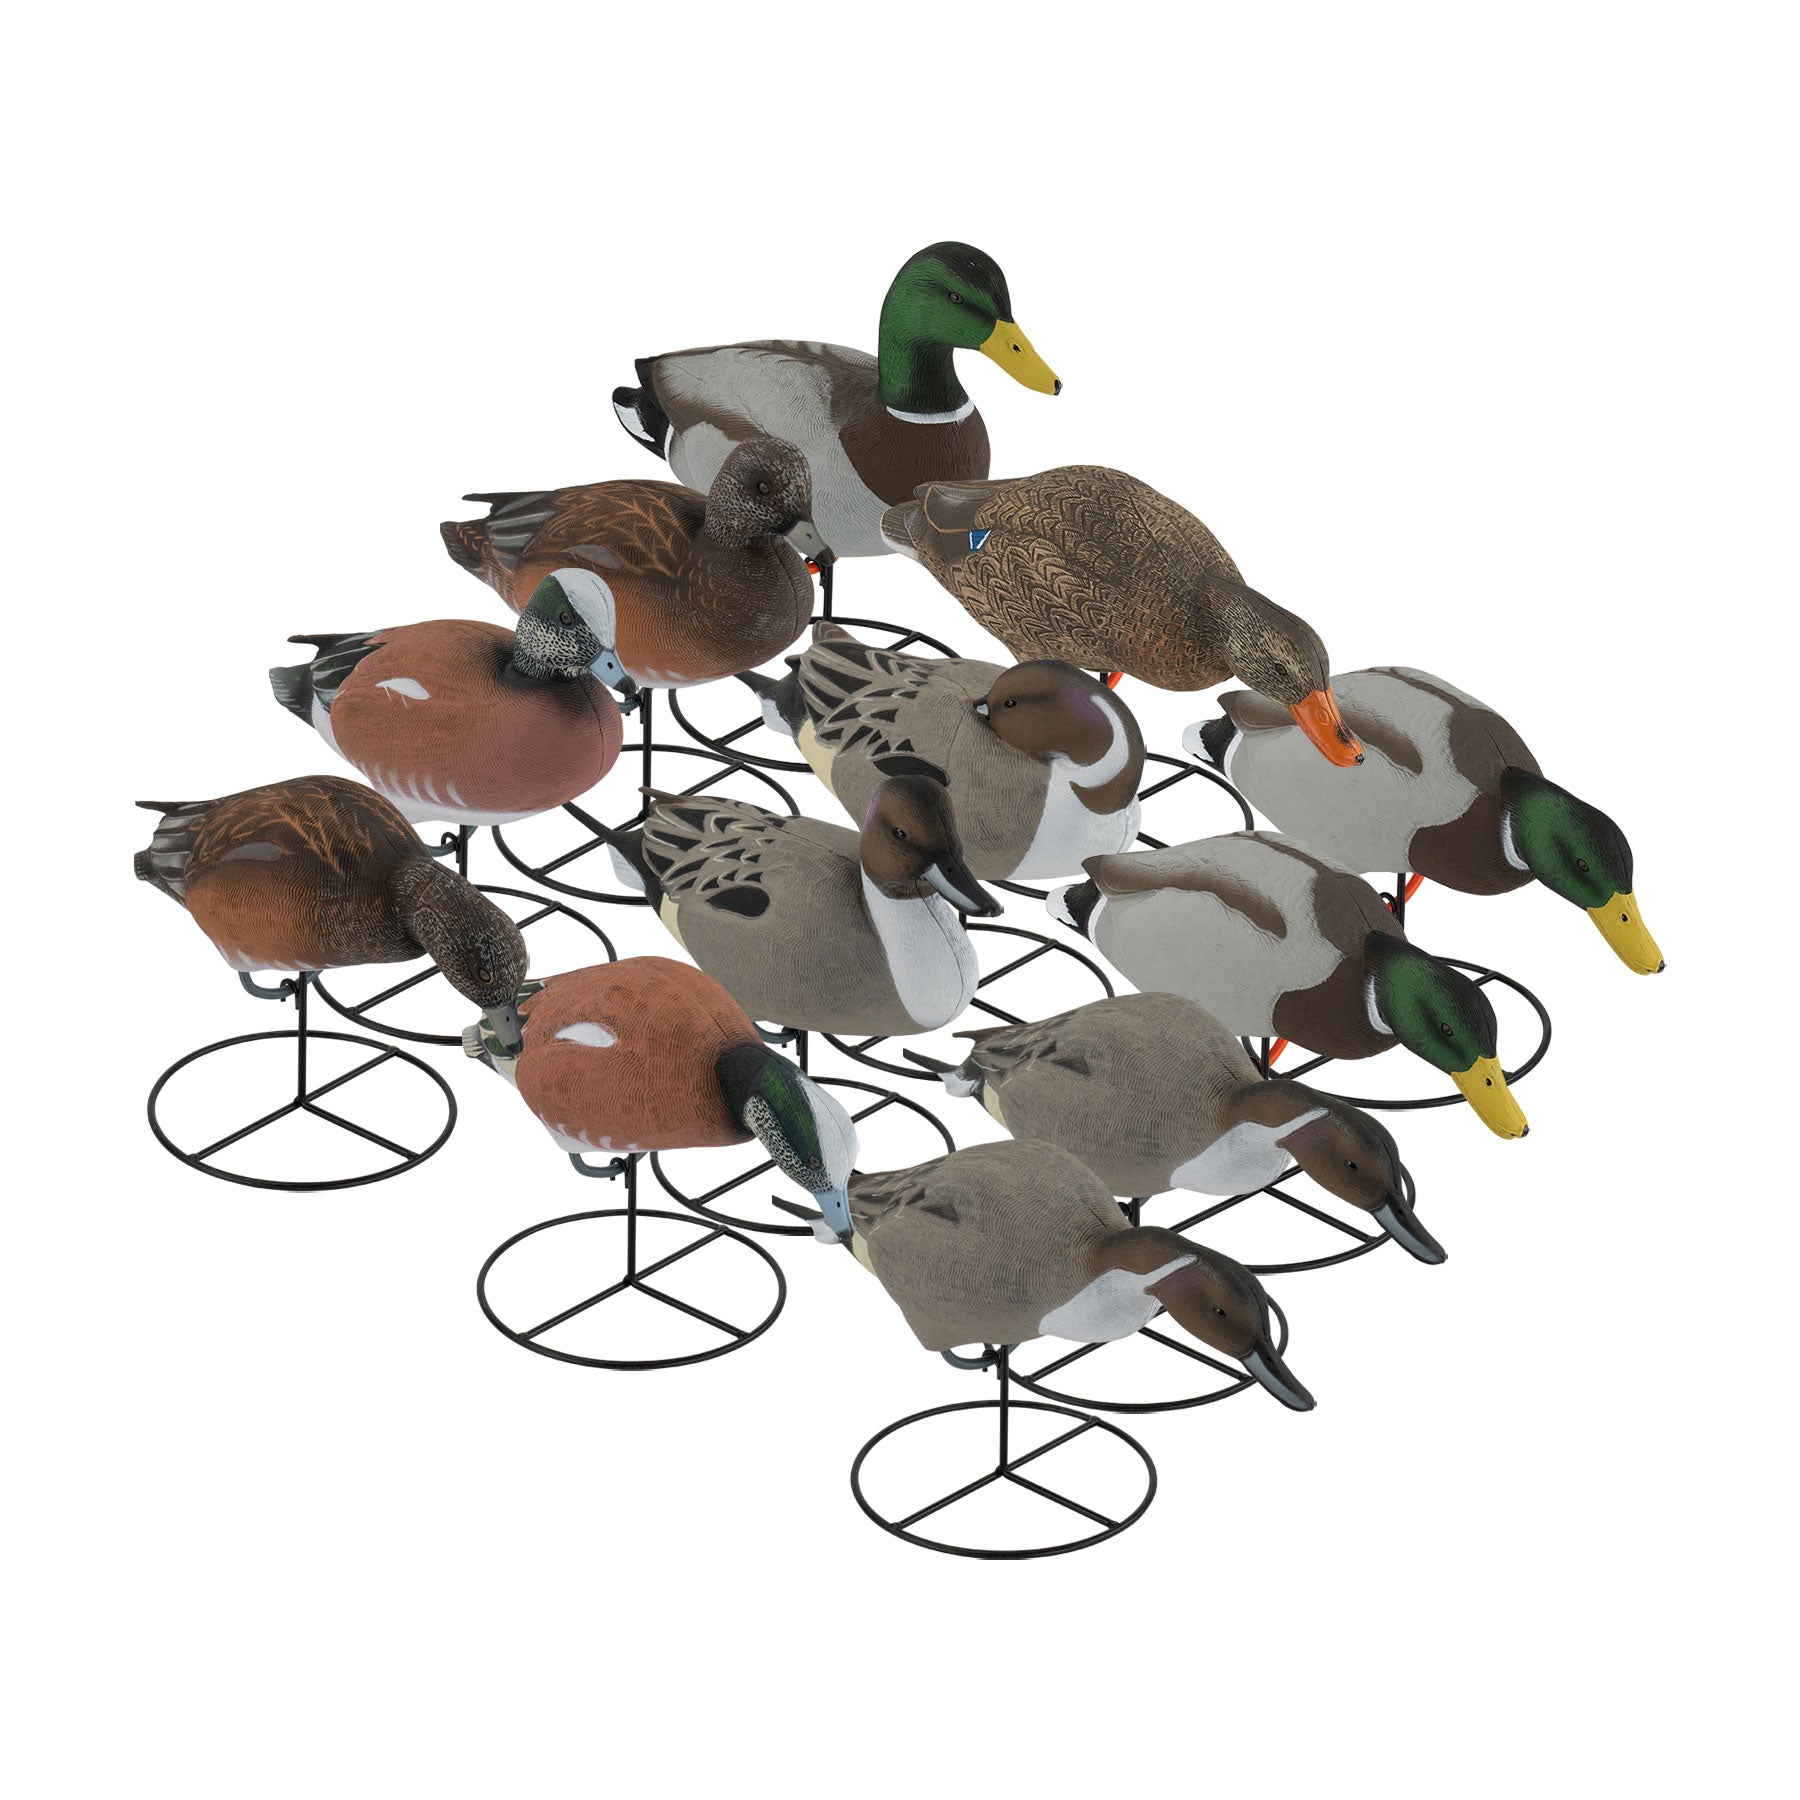 12 mixed duck decoys at a 3/4 angle